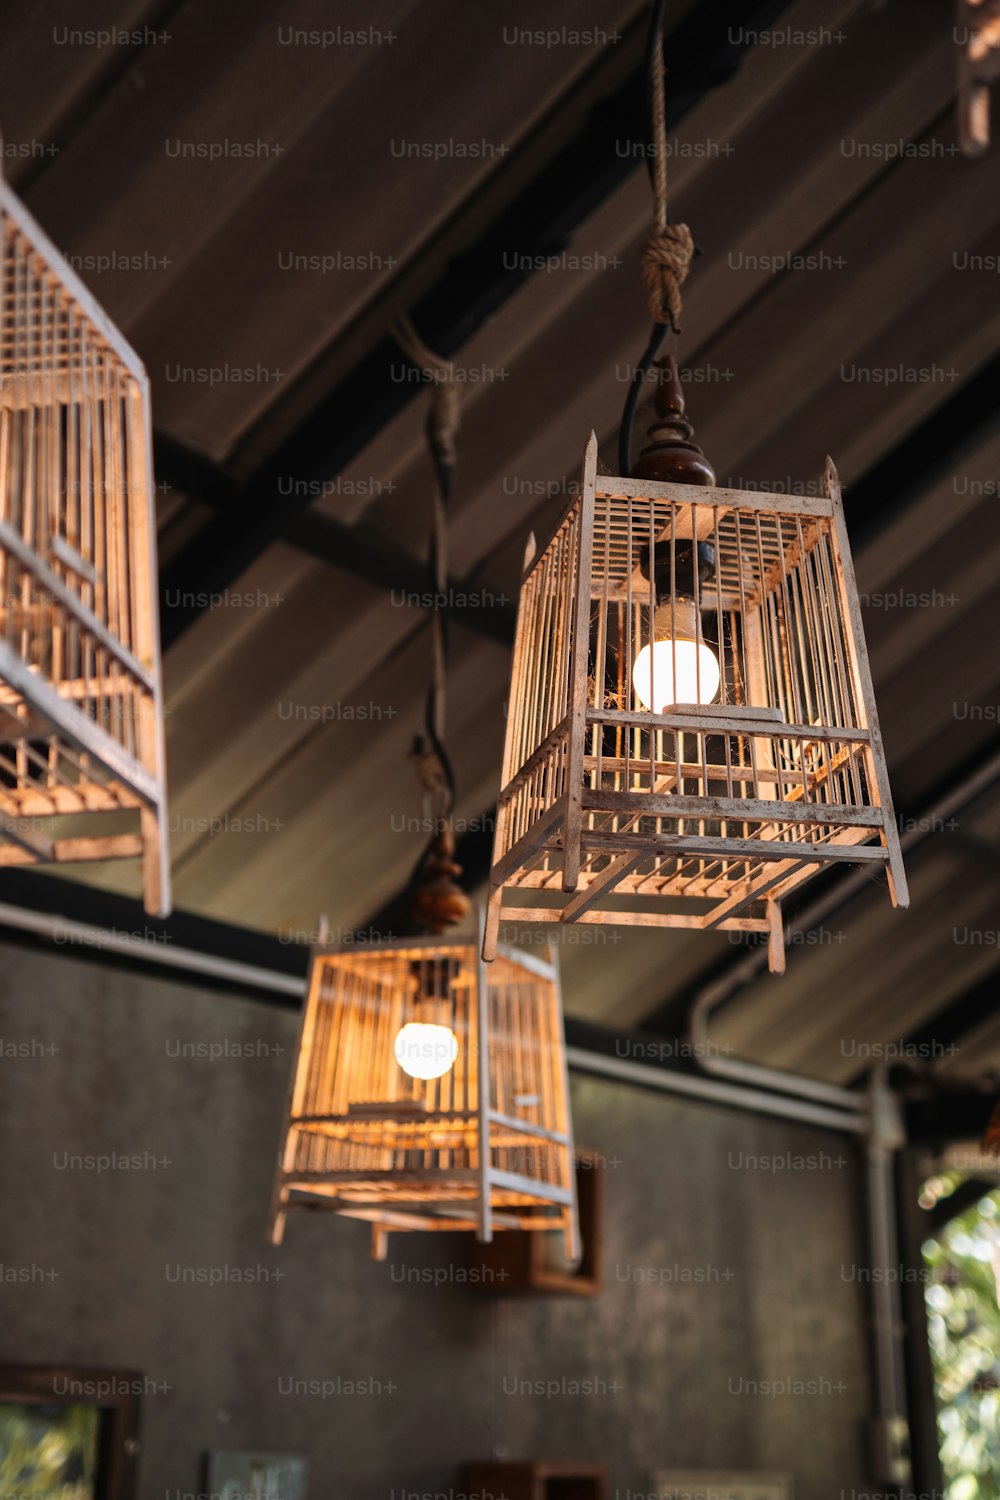 a bunch of bird cages hanging from a ceiling